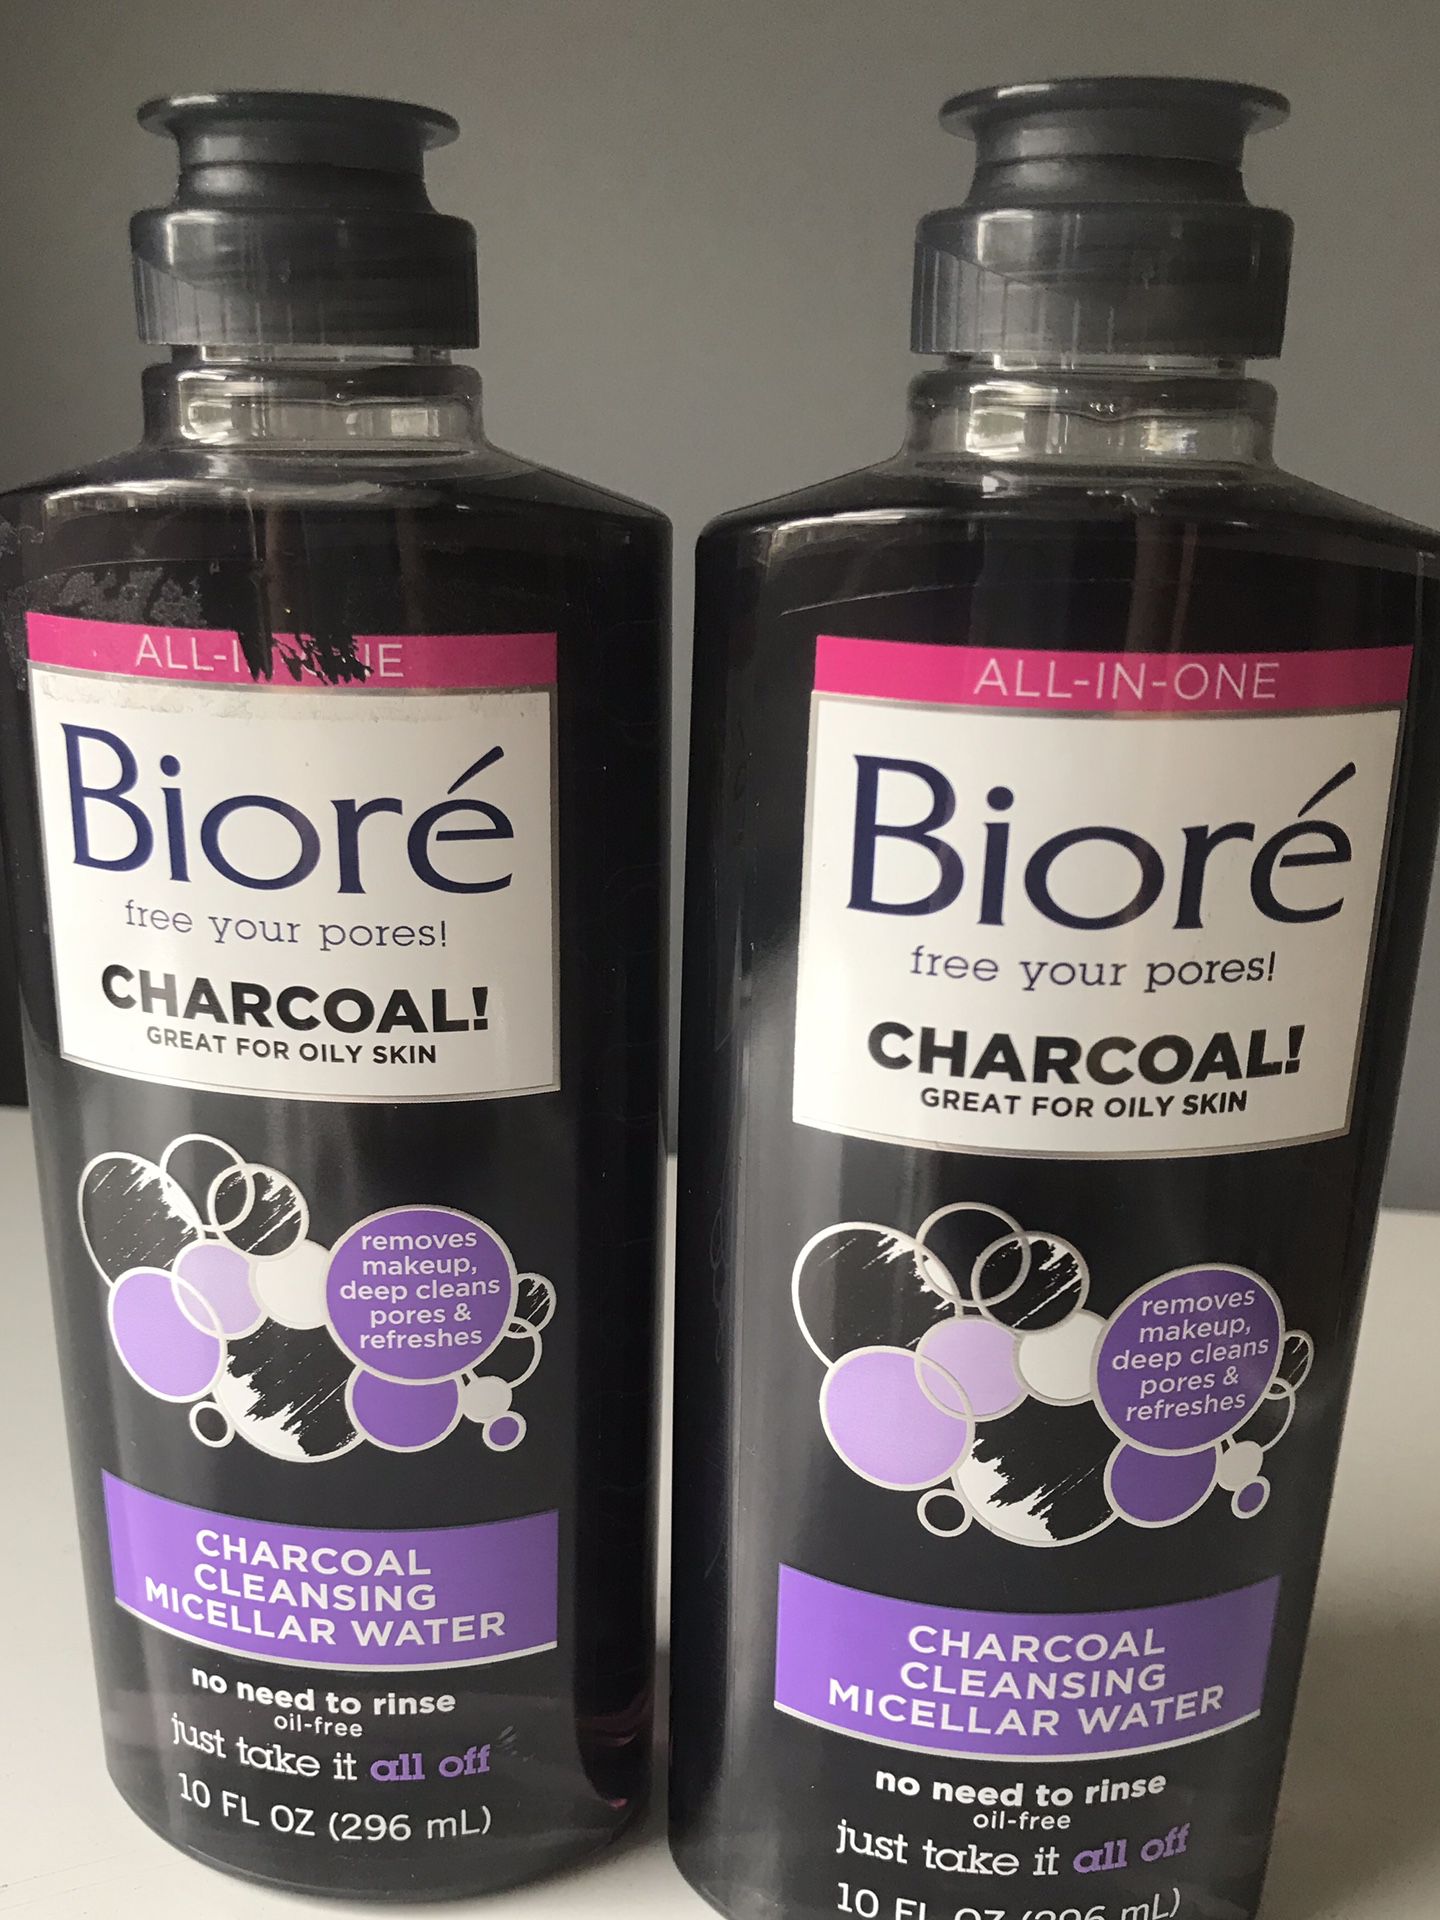 Biore cleansing water